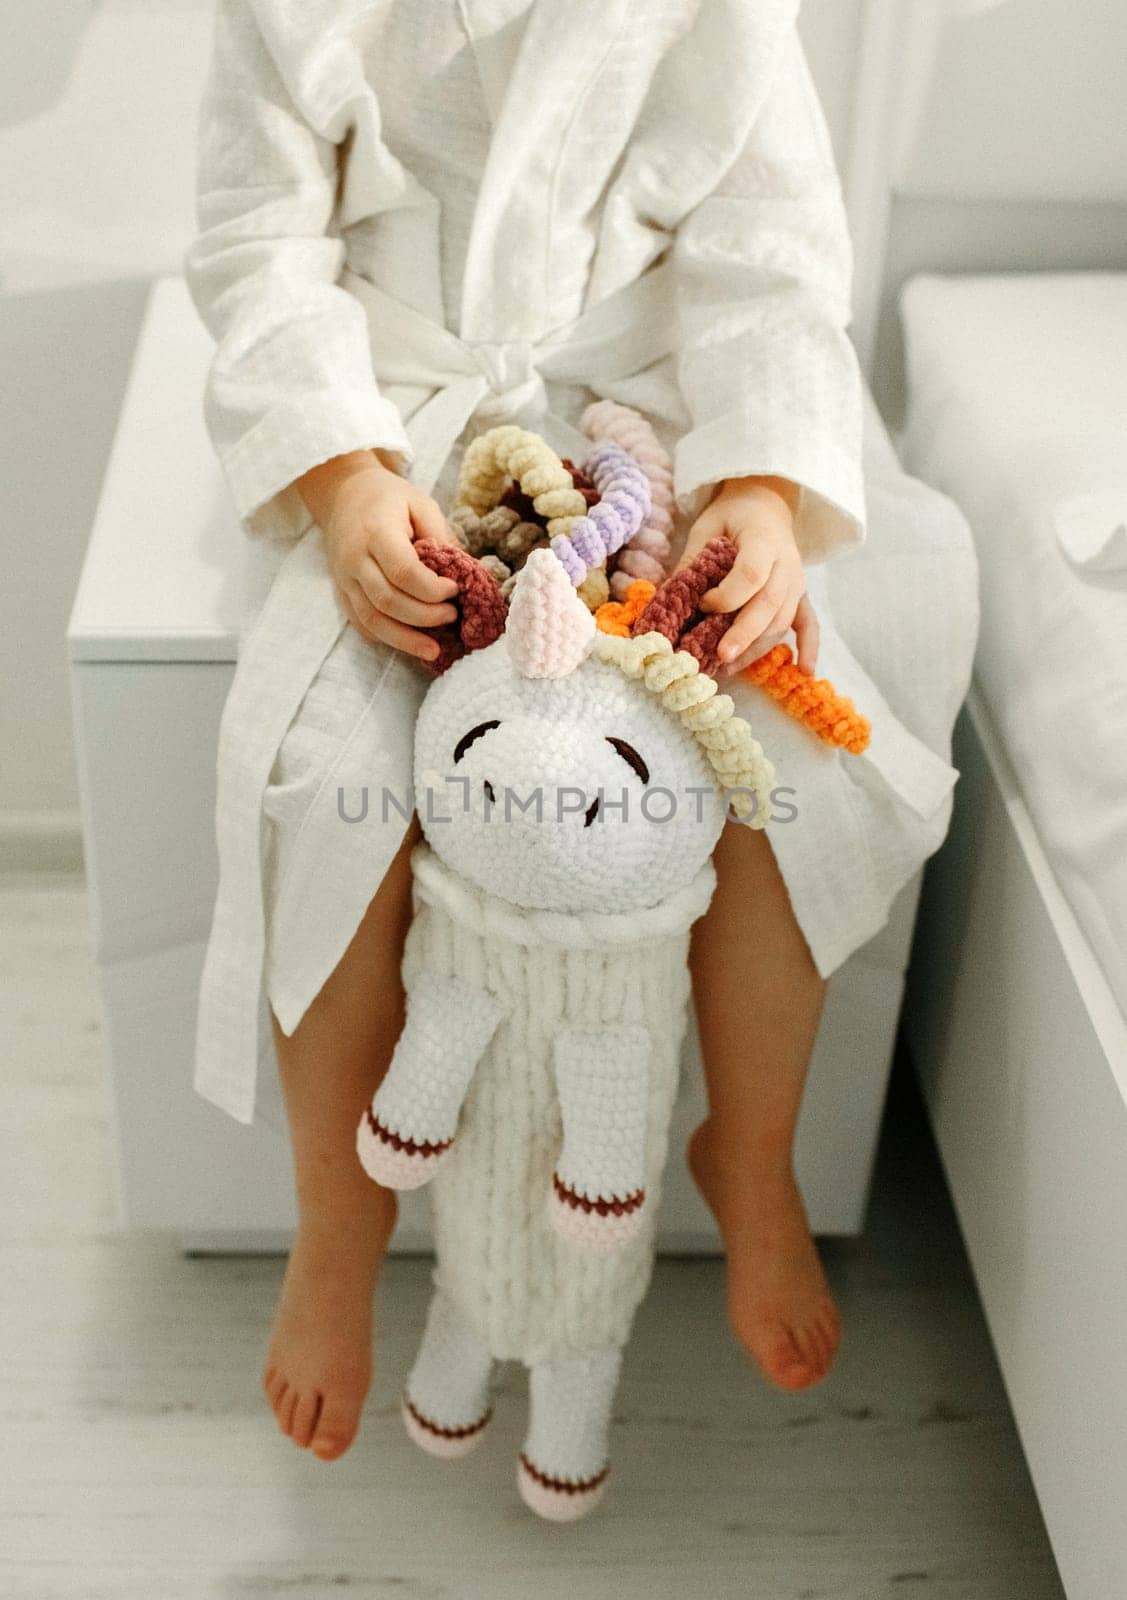 A girl in a bathrobe plays with a knitted unicorn.